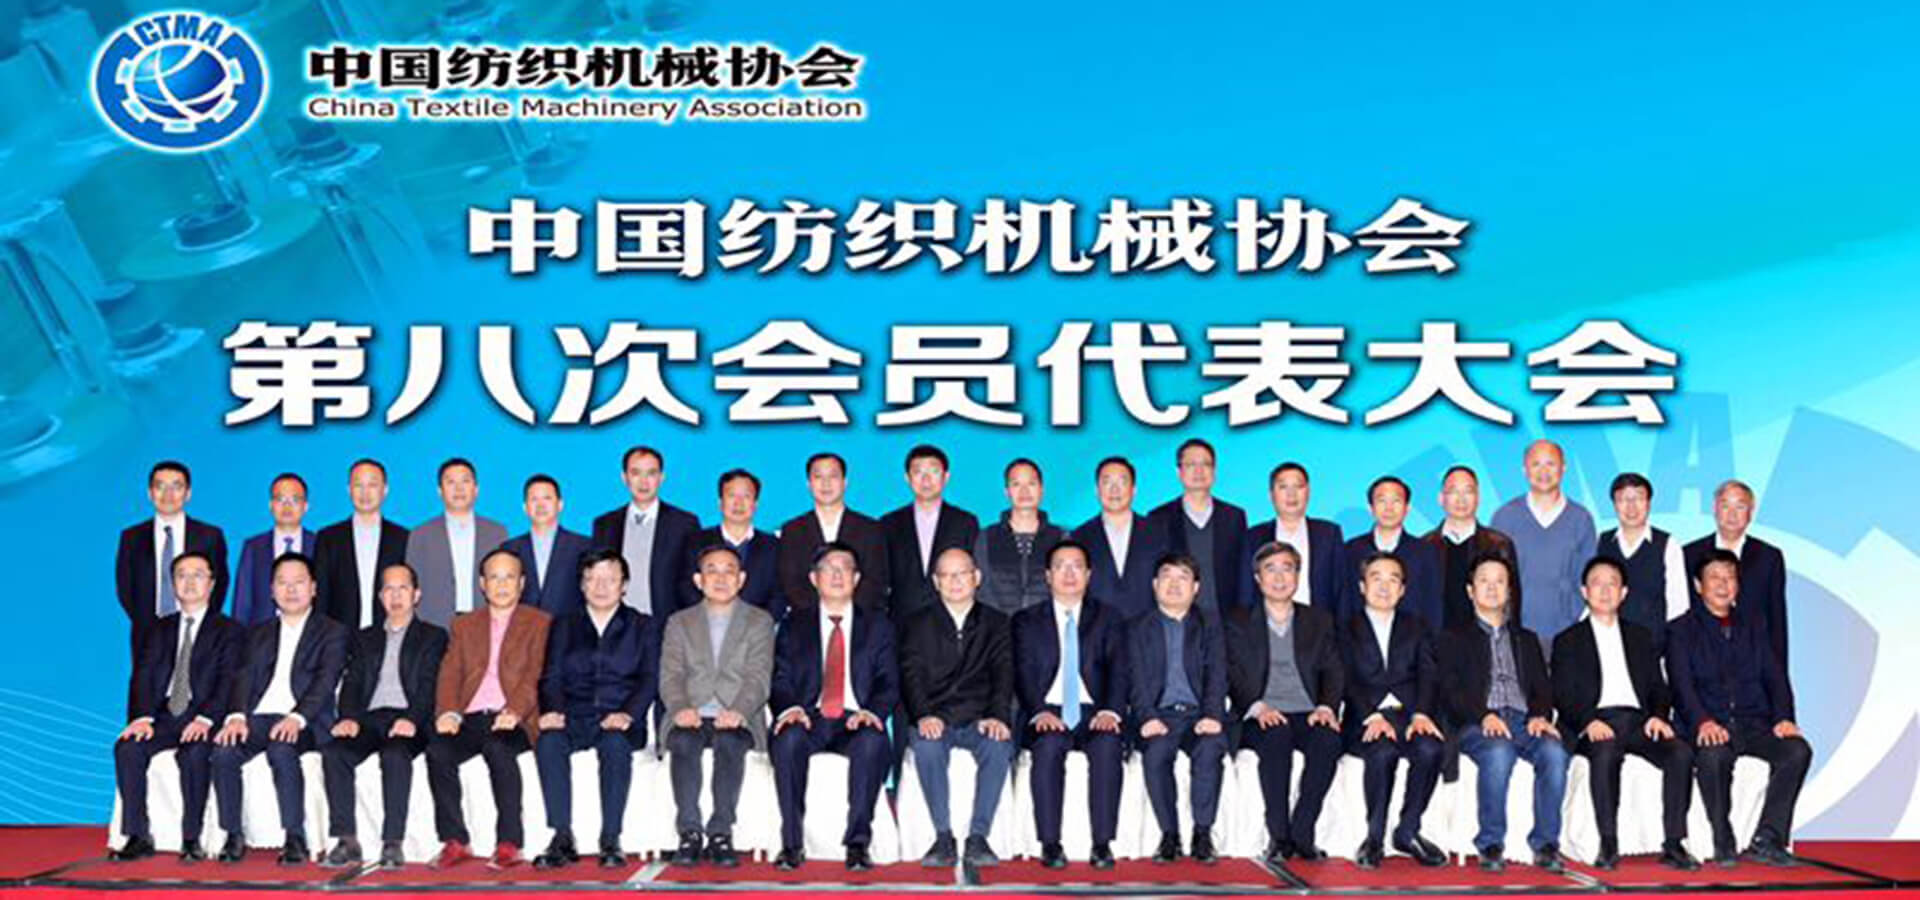 Chairman Jin Yongliang Was Re-elected Vice President of China Textile Machinery Association